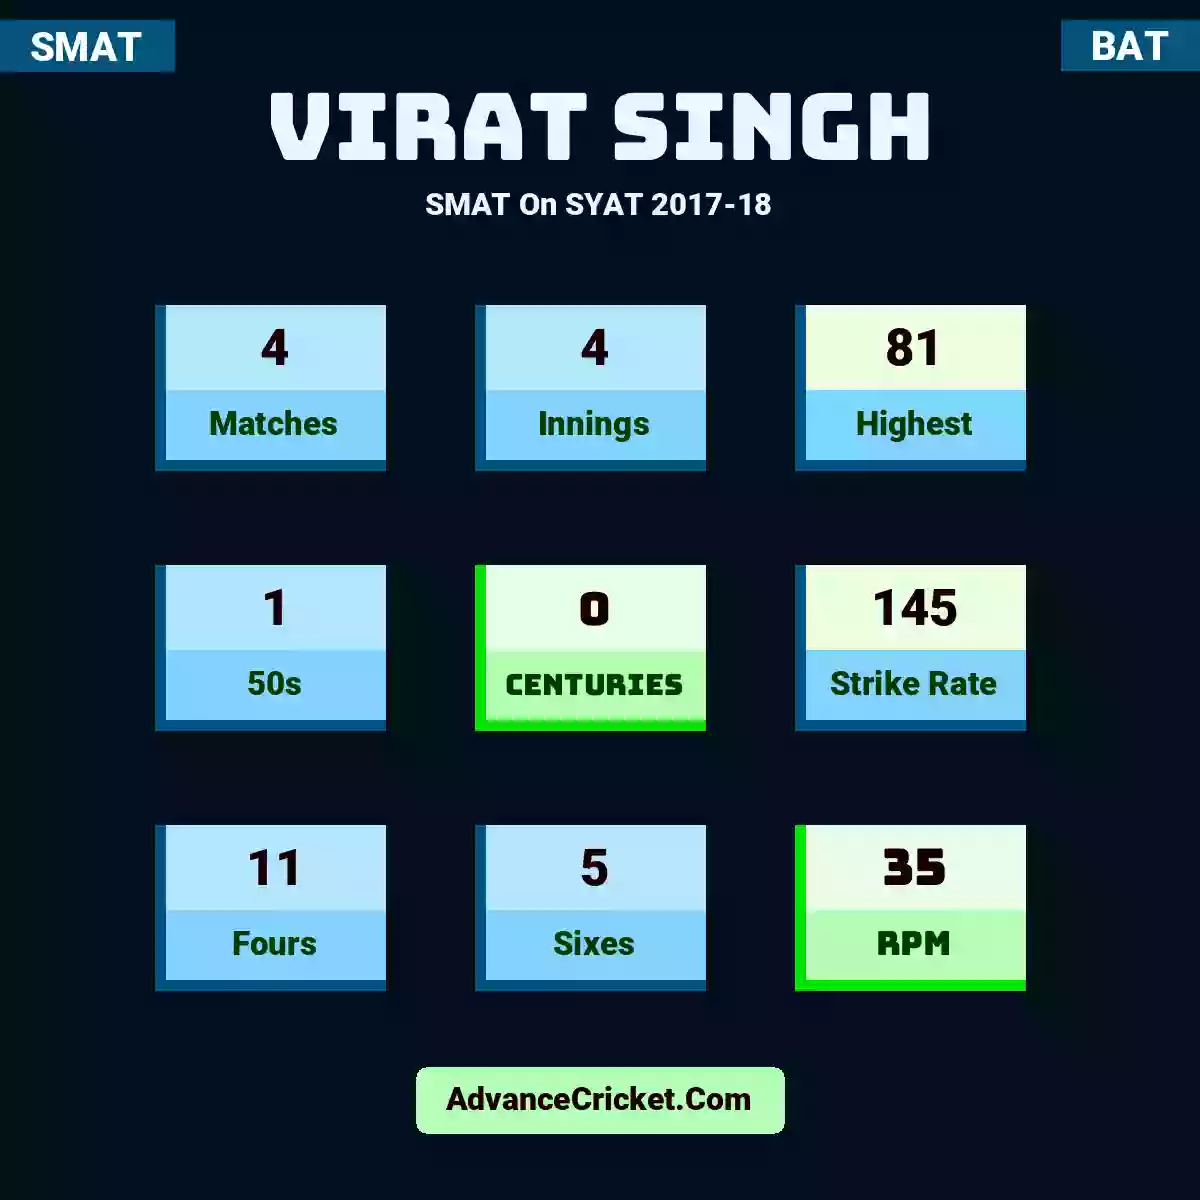 Virat Singh SMAT  On SYAT 2017-18, Virat Singh played 4 matches, scored 81 runs as highest, 1 half-centuries, and 0 centuries, with a strike rate of 145. V.Singh hit 11 fours and 5 sixes, with an RPM of 35.